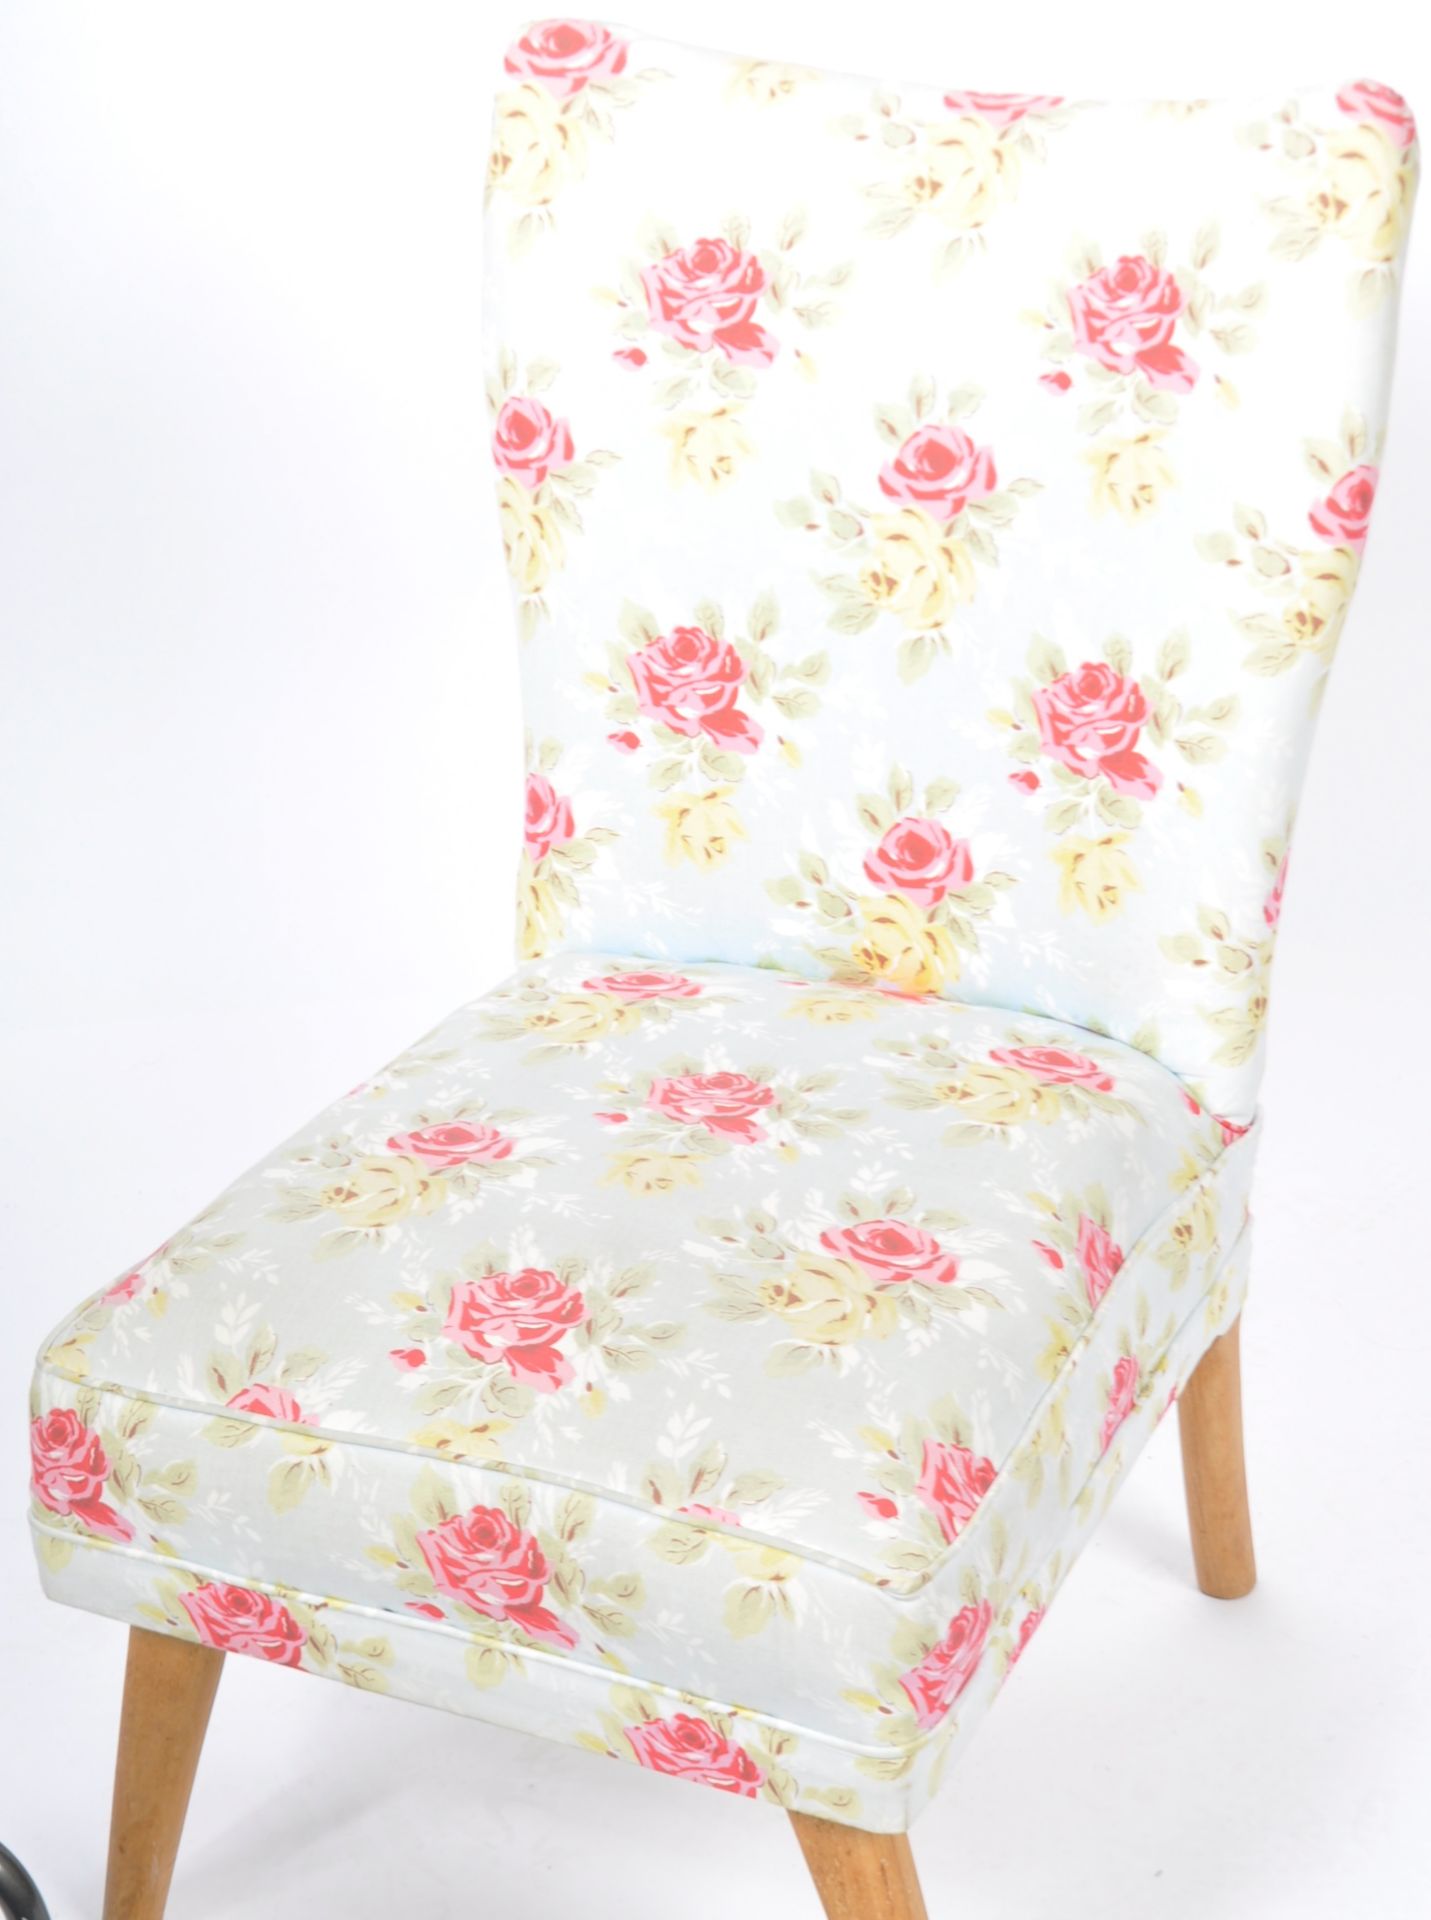 RETRO HOWARD KEITH MANNER LOW COCKTAIL CHAIR IN CATH KIDSTON UPHOLSTERY - Image 2 of 7